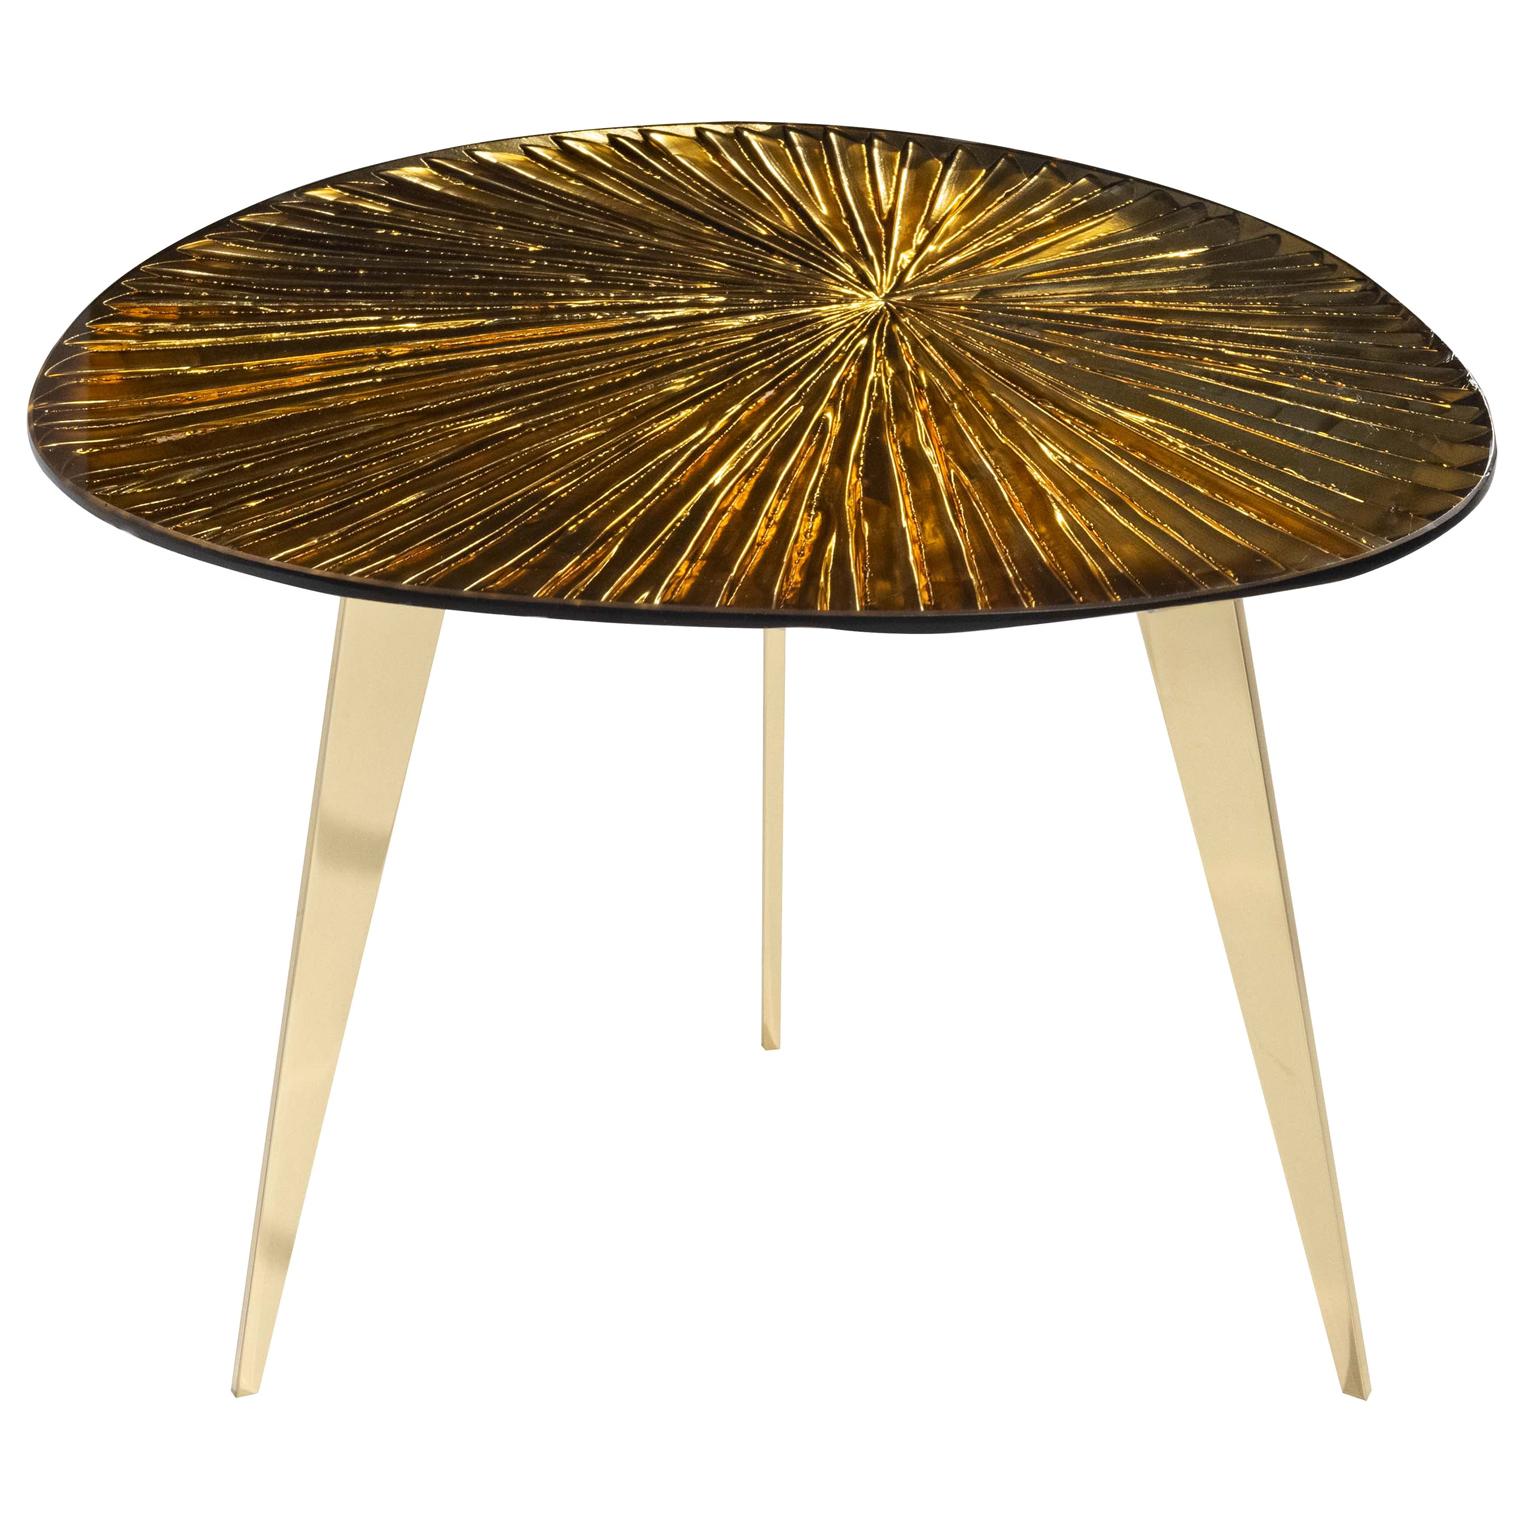 Contemporary 'Ambra' Coffee Table Amber Cristal and Brass by Ghirò Studio